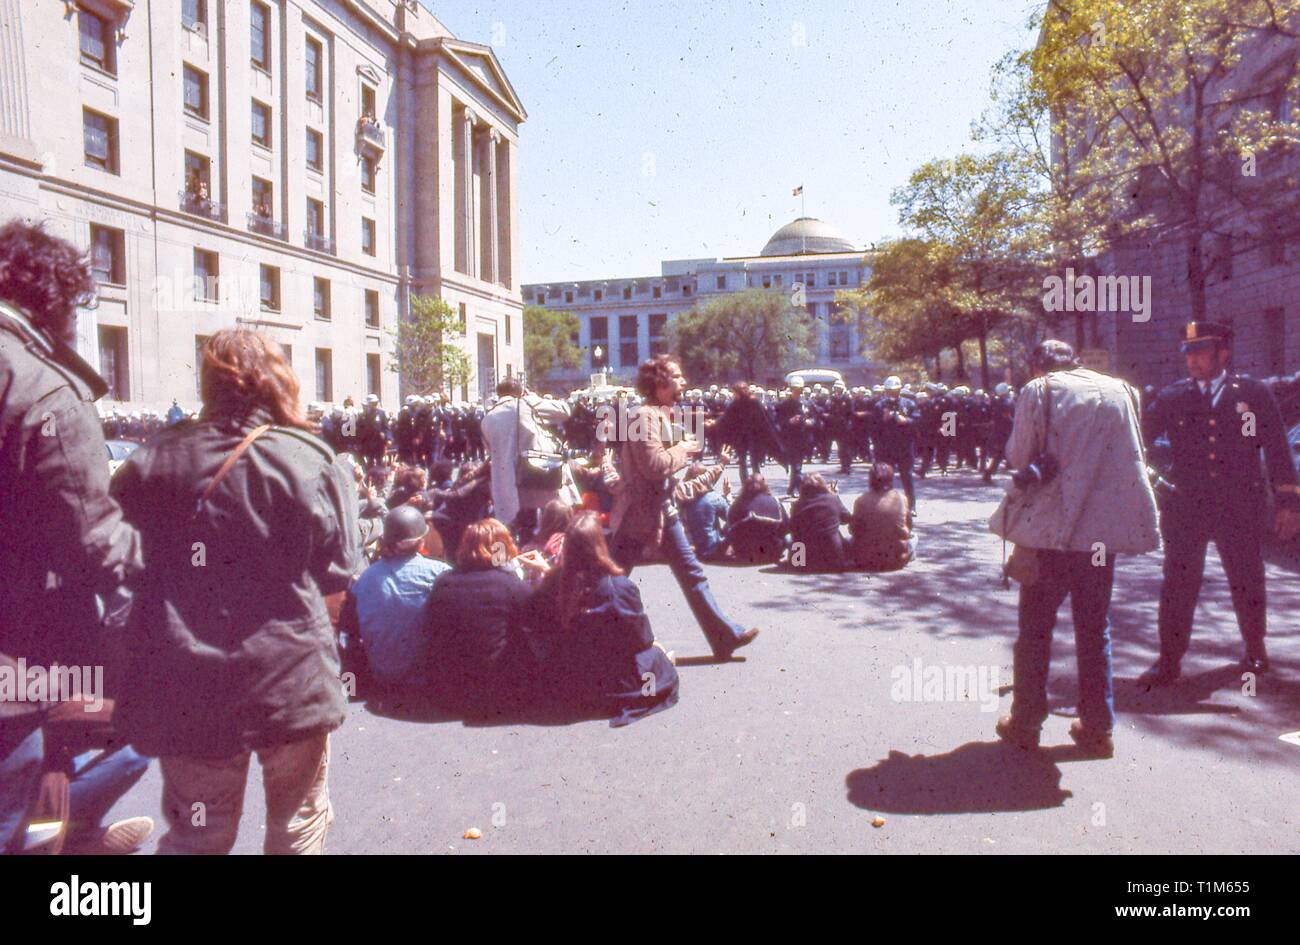 During the 1971 May Day Protests against the Vietnam War, protesters in hippie attire sit in the middle of 10th St NW, on a sunny day, facing a large number of police officers, in Washington, DC, May 1971. () Stock Photo